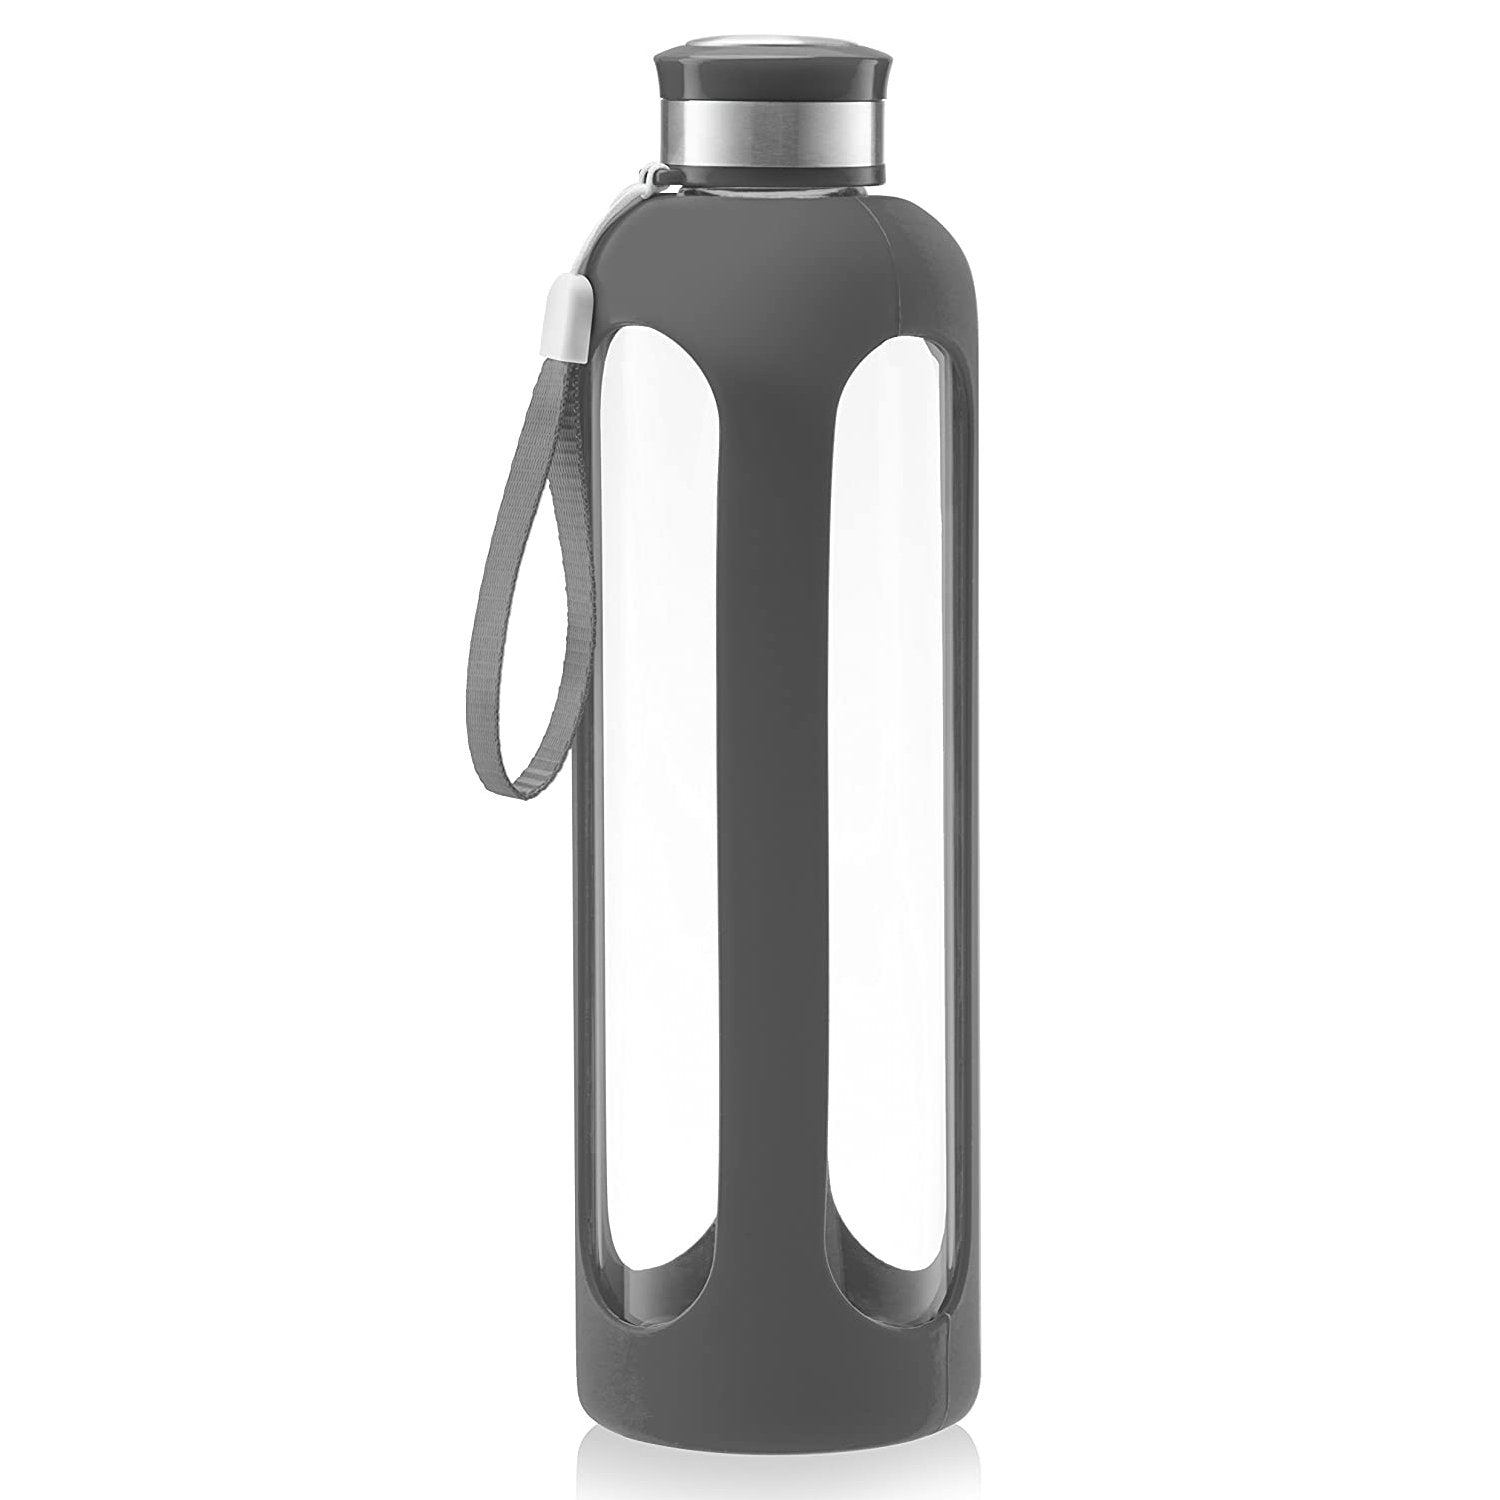 Swig Savvy Glass Water Bottles with Protective Silicone Sleeve &amp; Stainless Steel Leak Proof Lid / Gray